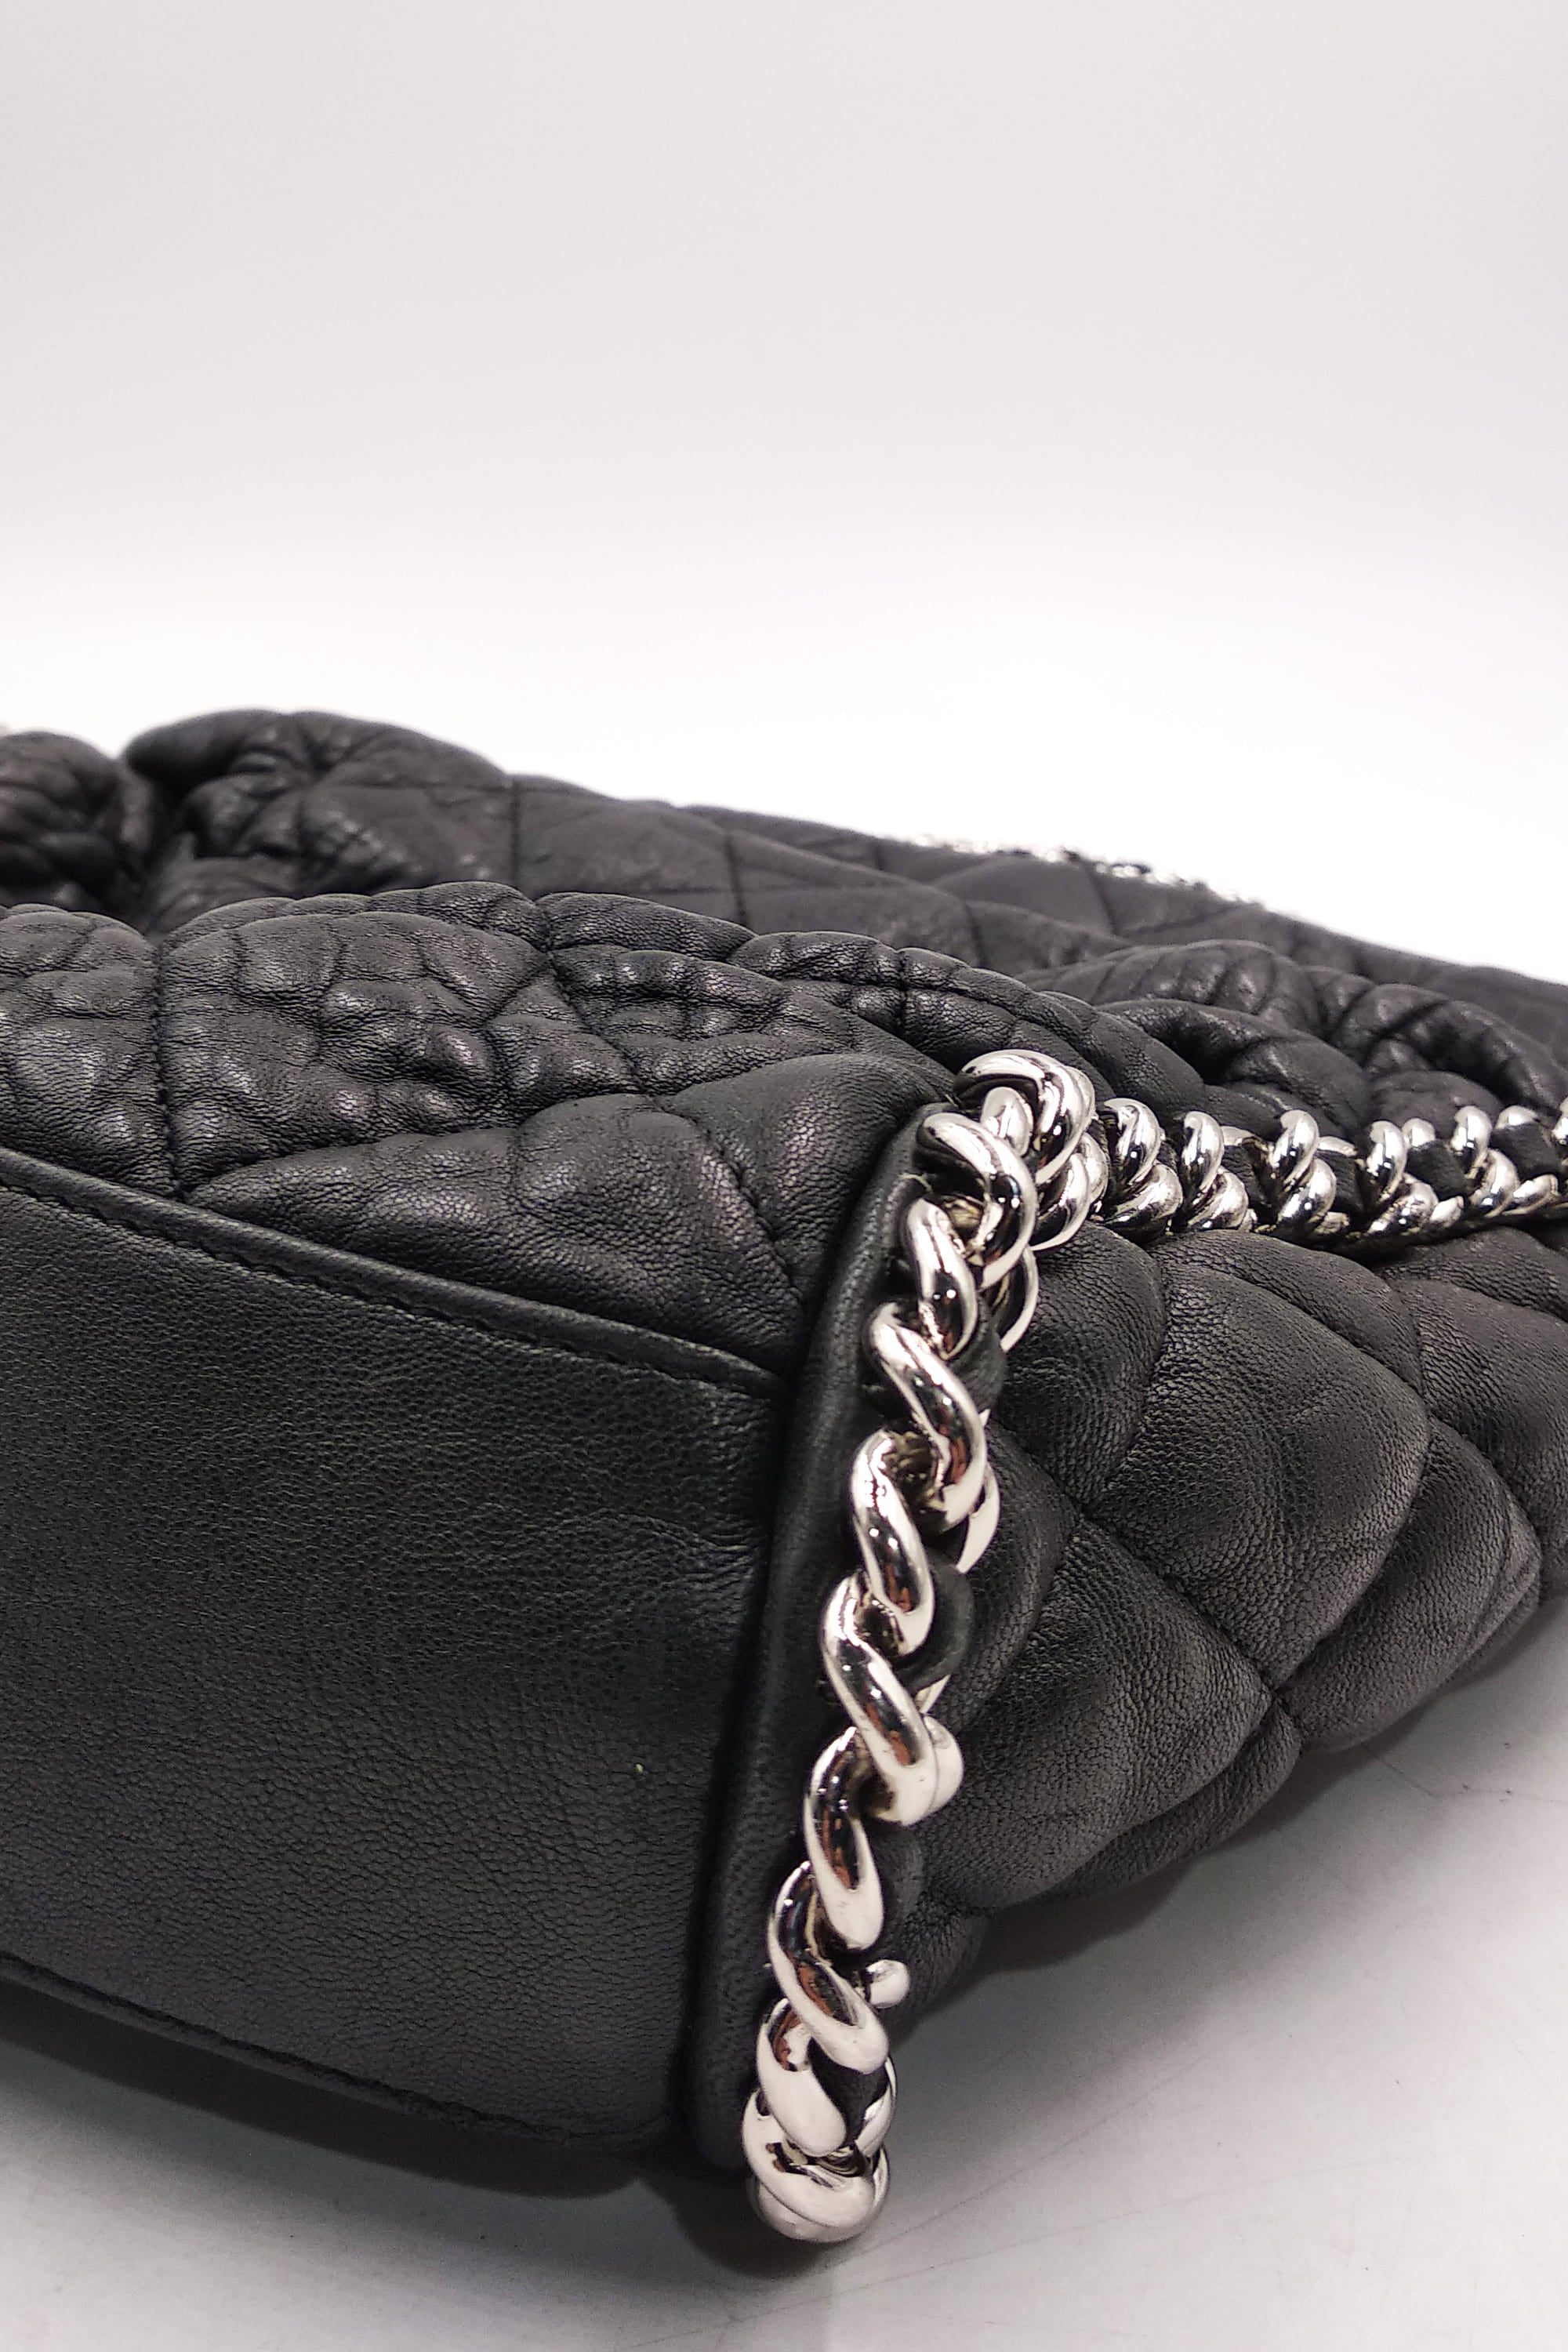 Chanel Black Shiny Calfskin Quilted Small Chanel 22 Tote Bag – ASC Resale